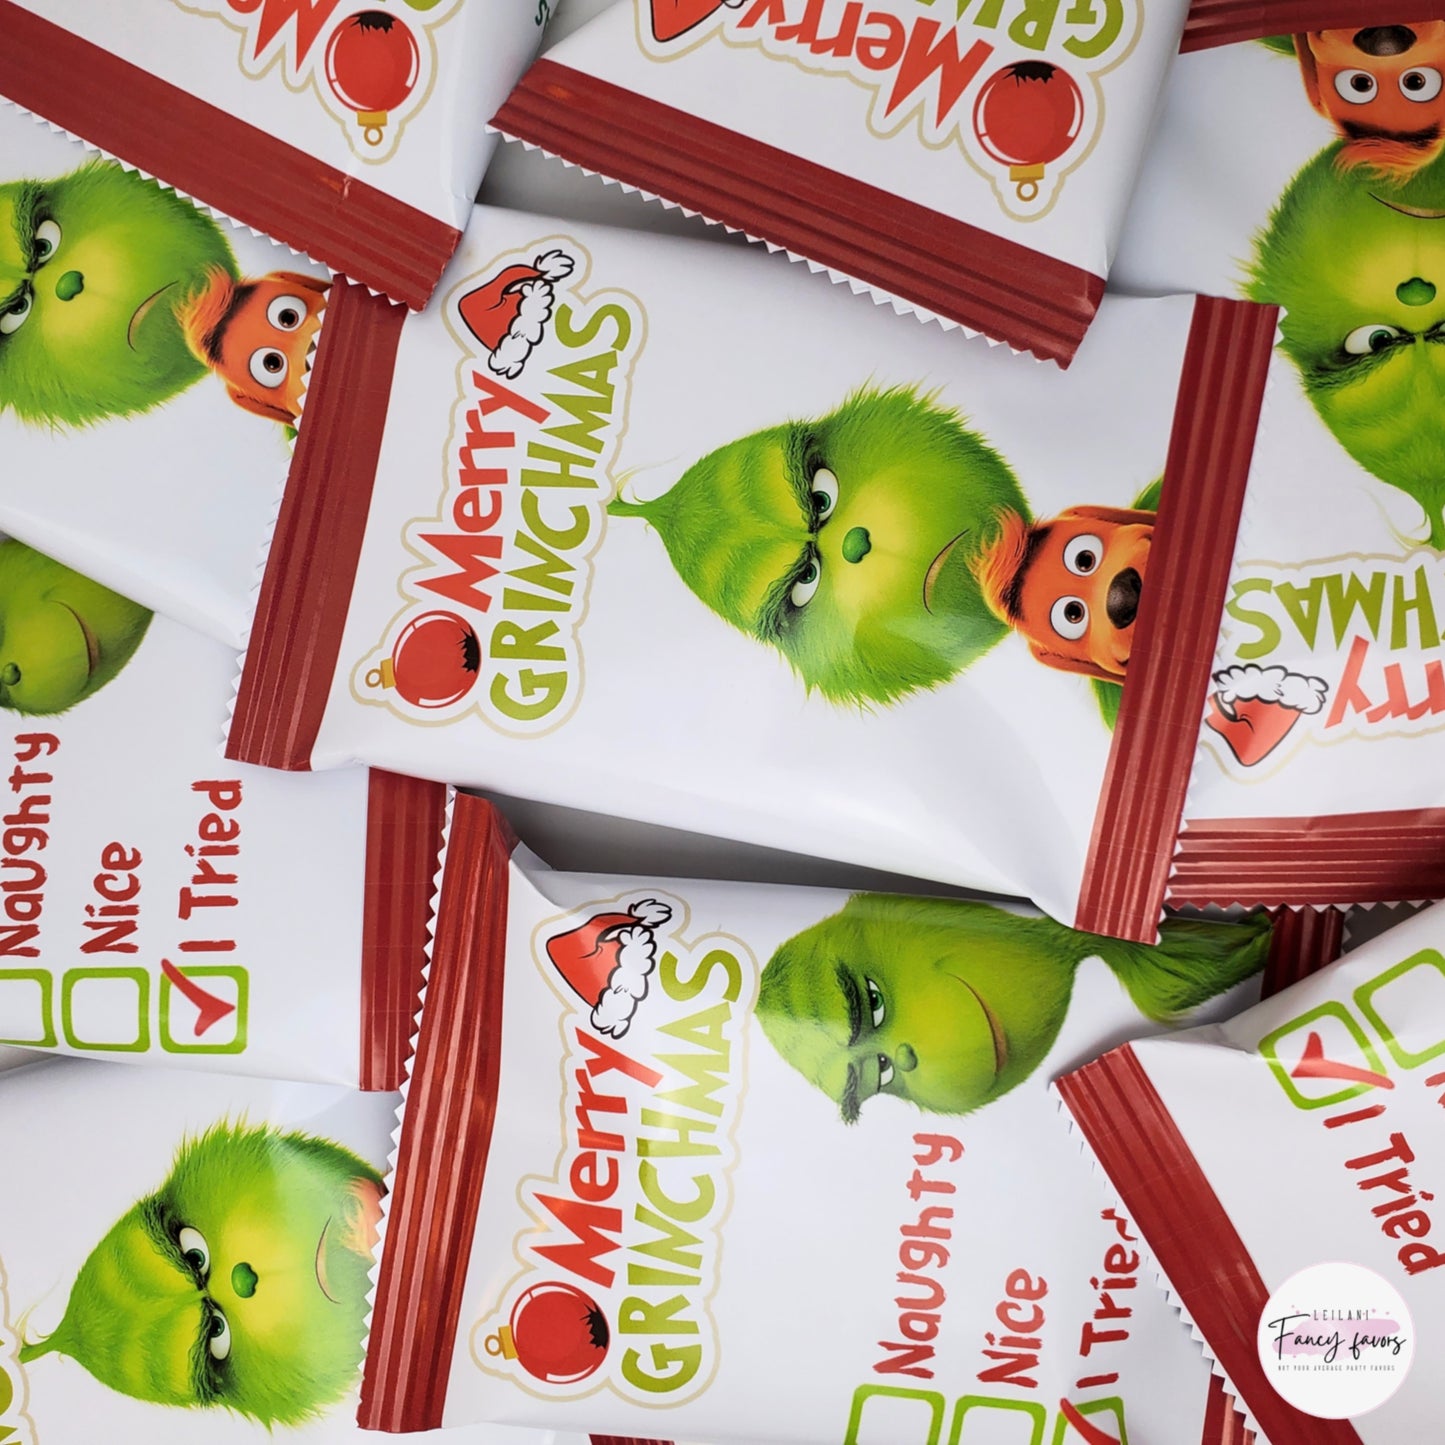 Grinchmas Christmas Chip Bag label Template, Chip bag Customizable template, Personalized chip bag Digital File